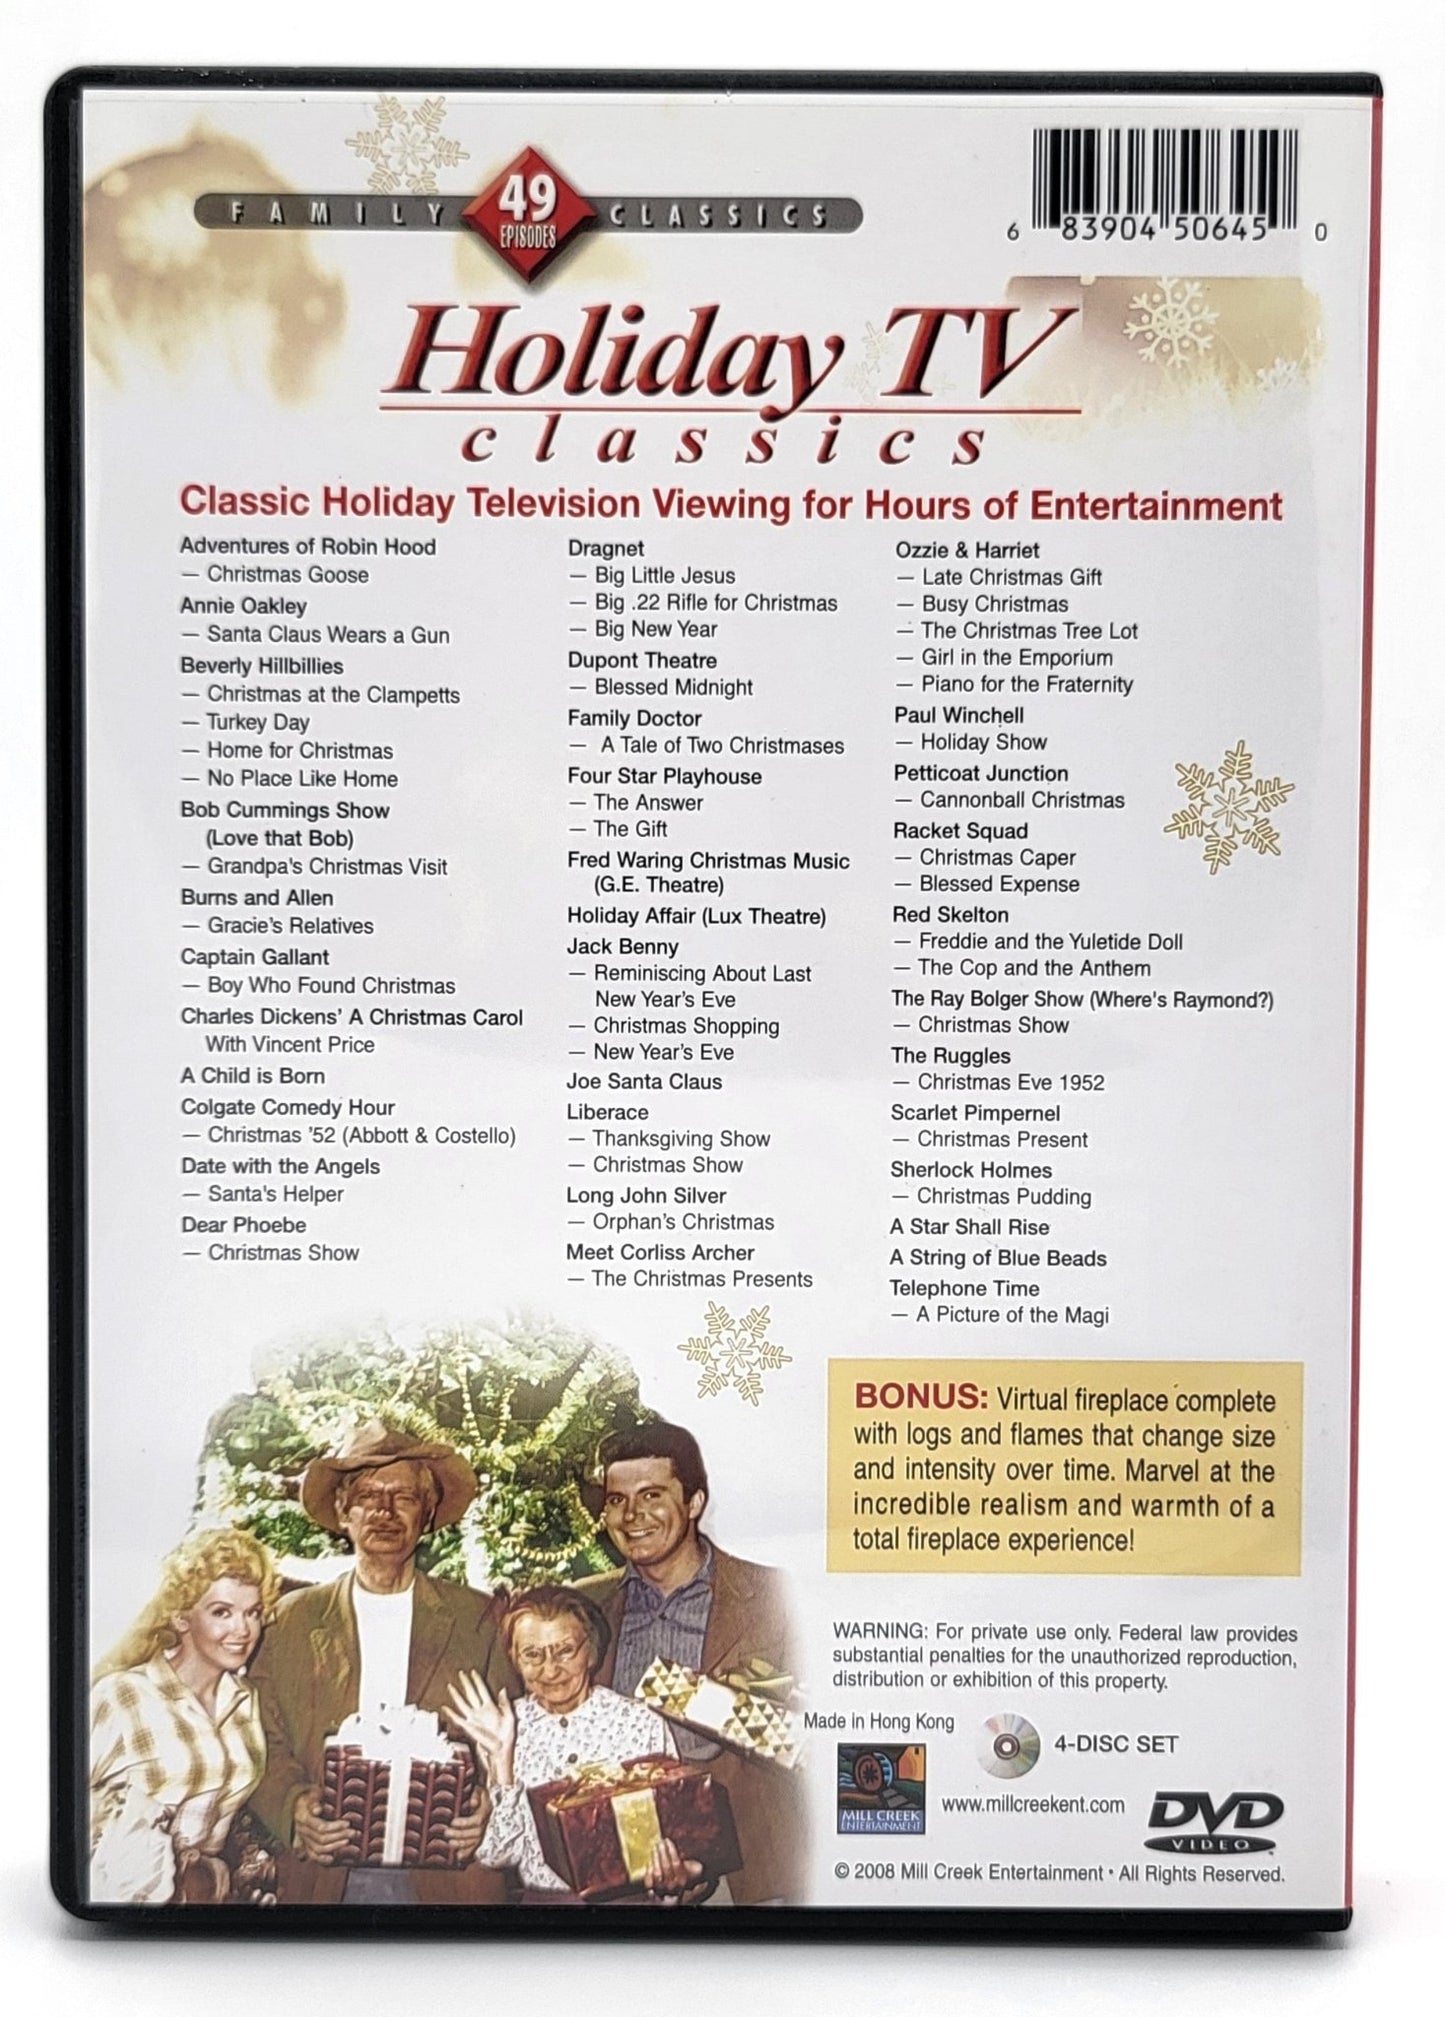 Mill Creek Entertainment - Holiday Family Collection | Special Collector's Edition | 12 Holiday Movies, 49 TV Episodes & 27 Christmas Caartoons - DVD - Steady Bunny Shop